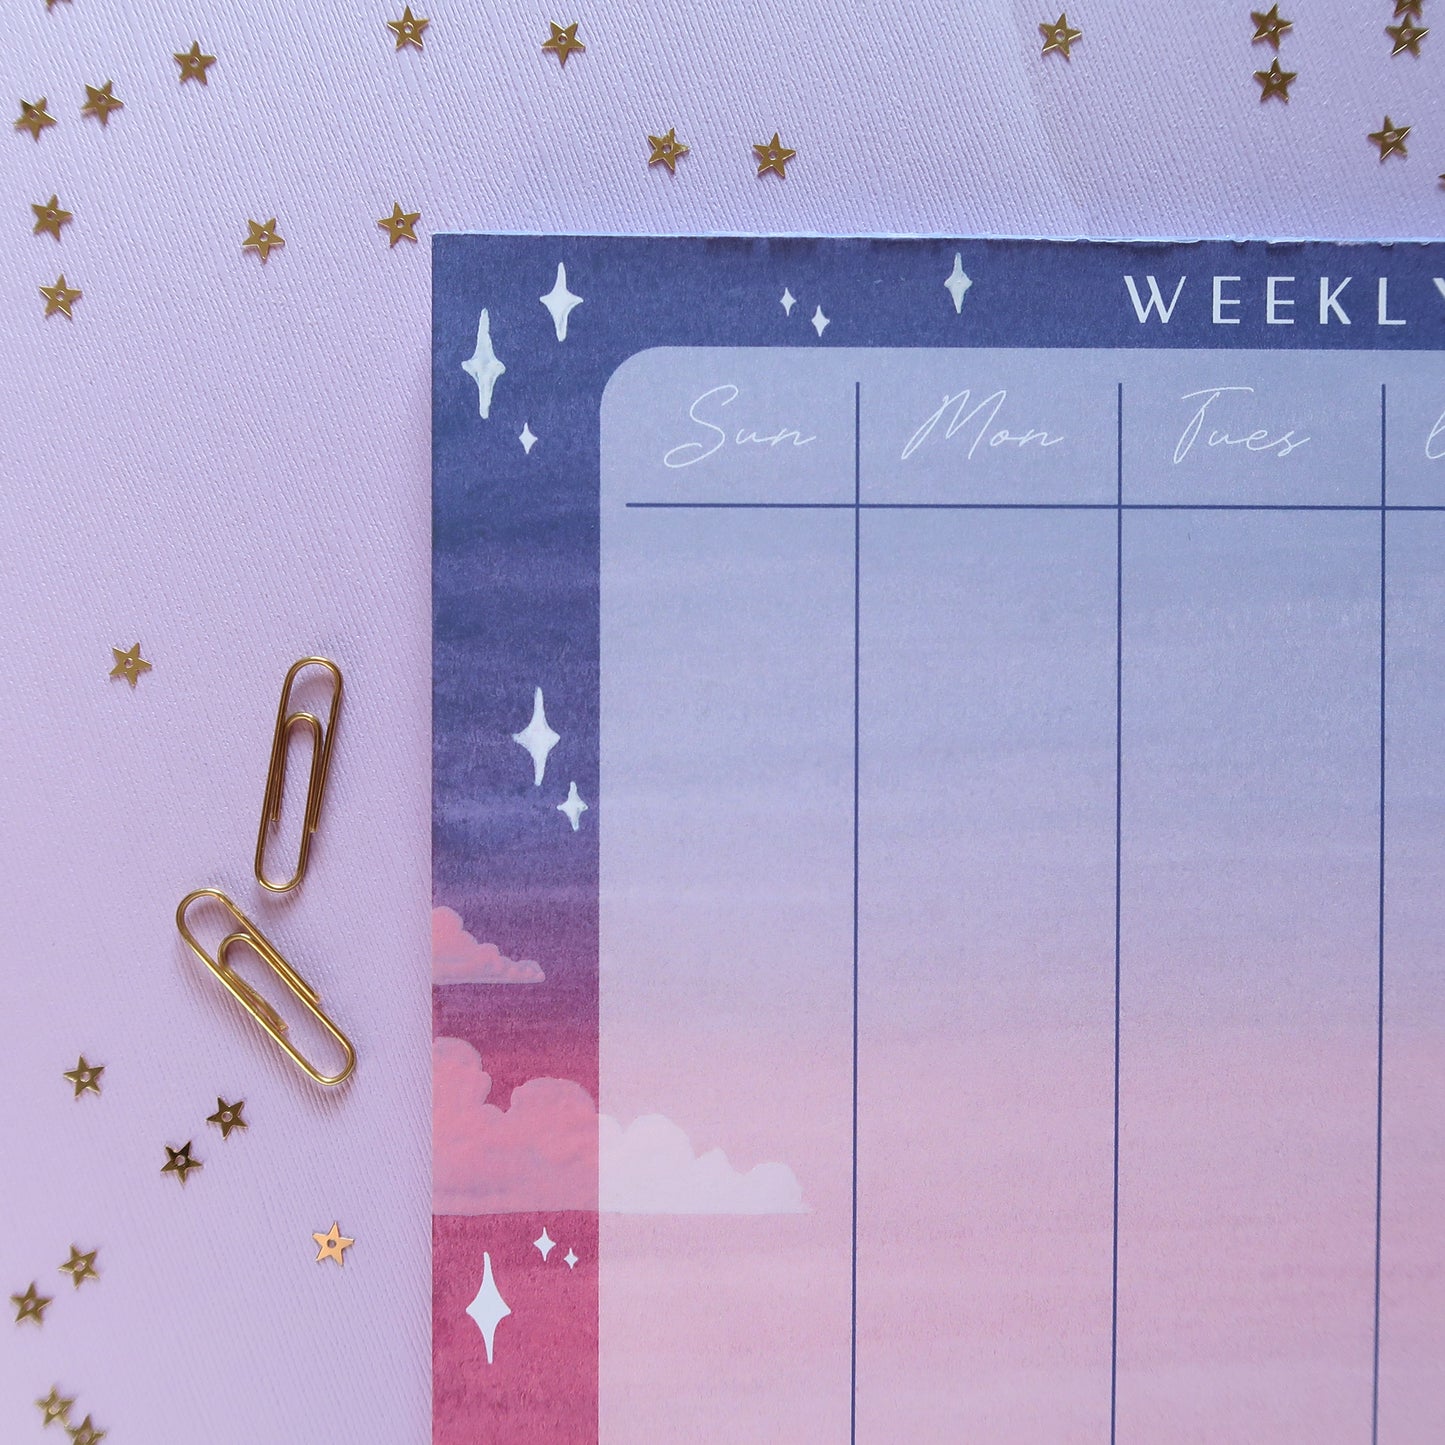 Purple and Pink Sunset Sky Weekly Planner - Stationery